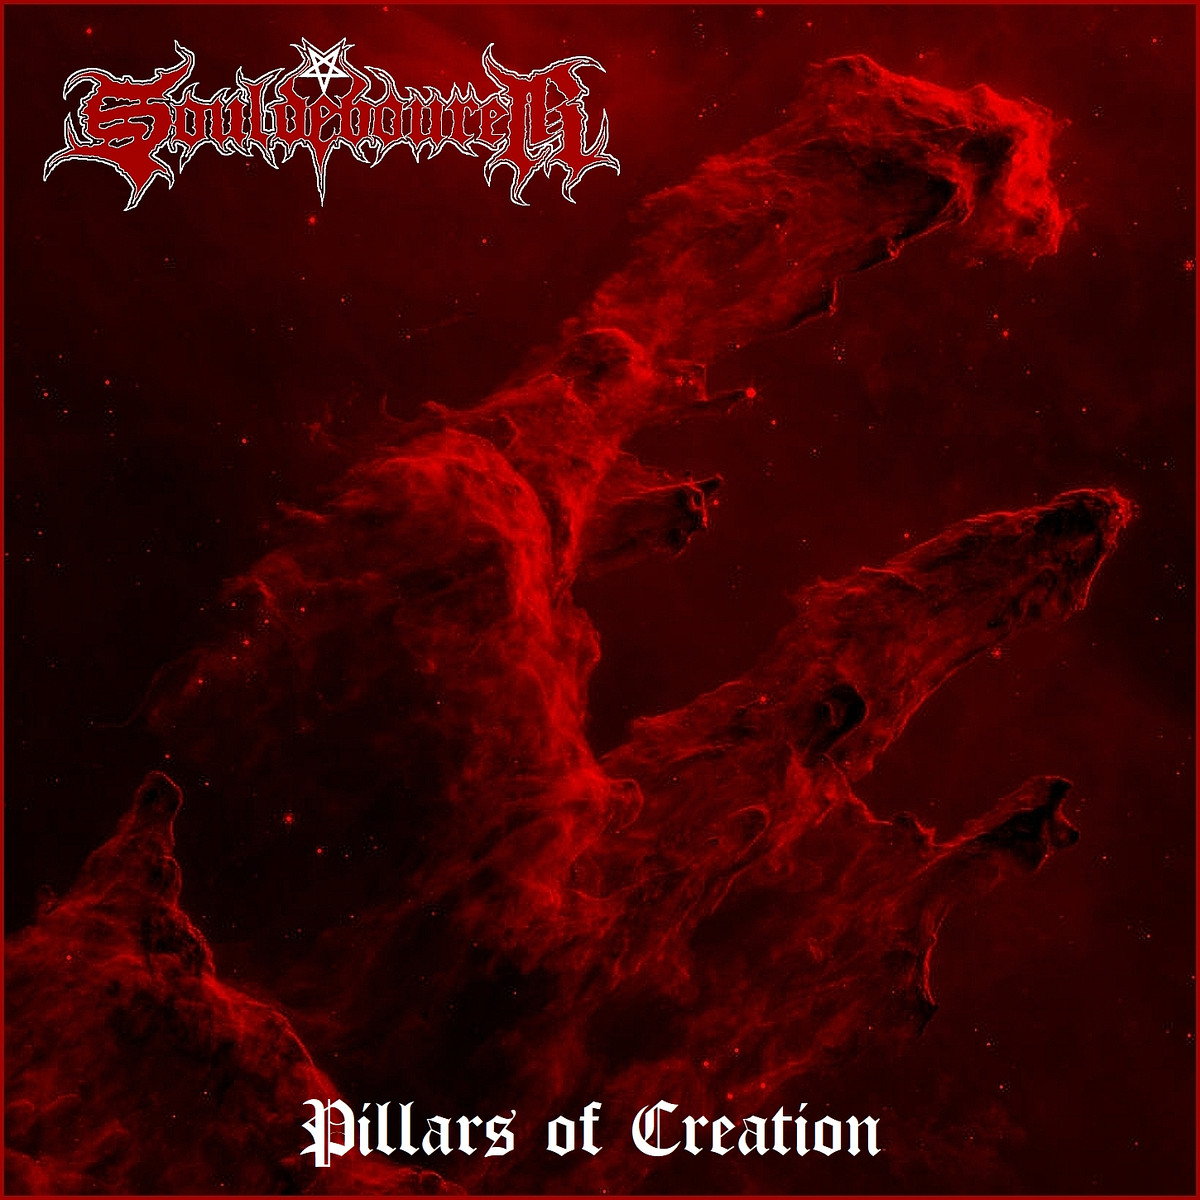 'Pillars of Creation (Intro)' by Souldevourer from 'Pillars of Creation' in 2023. #NowPlaying